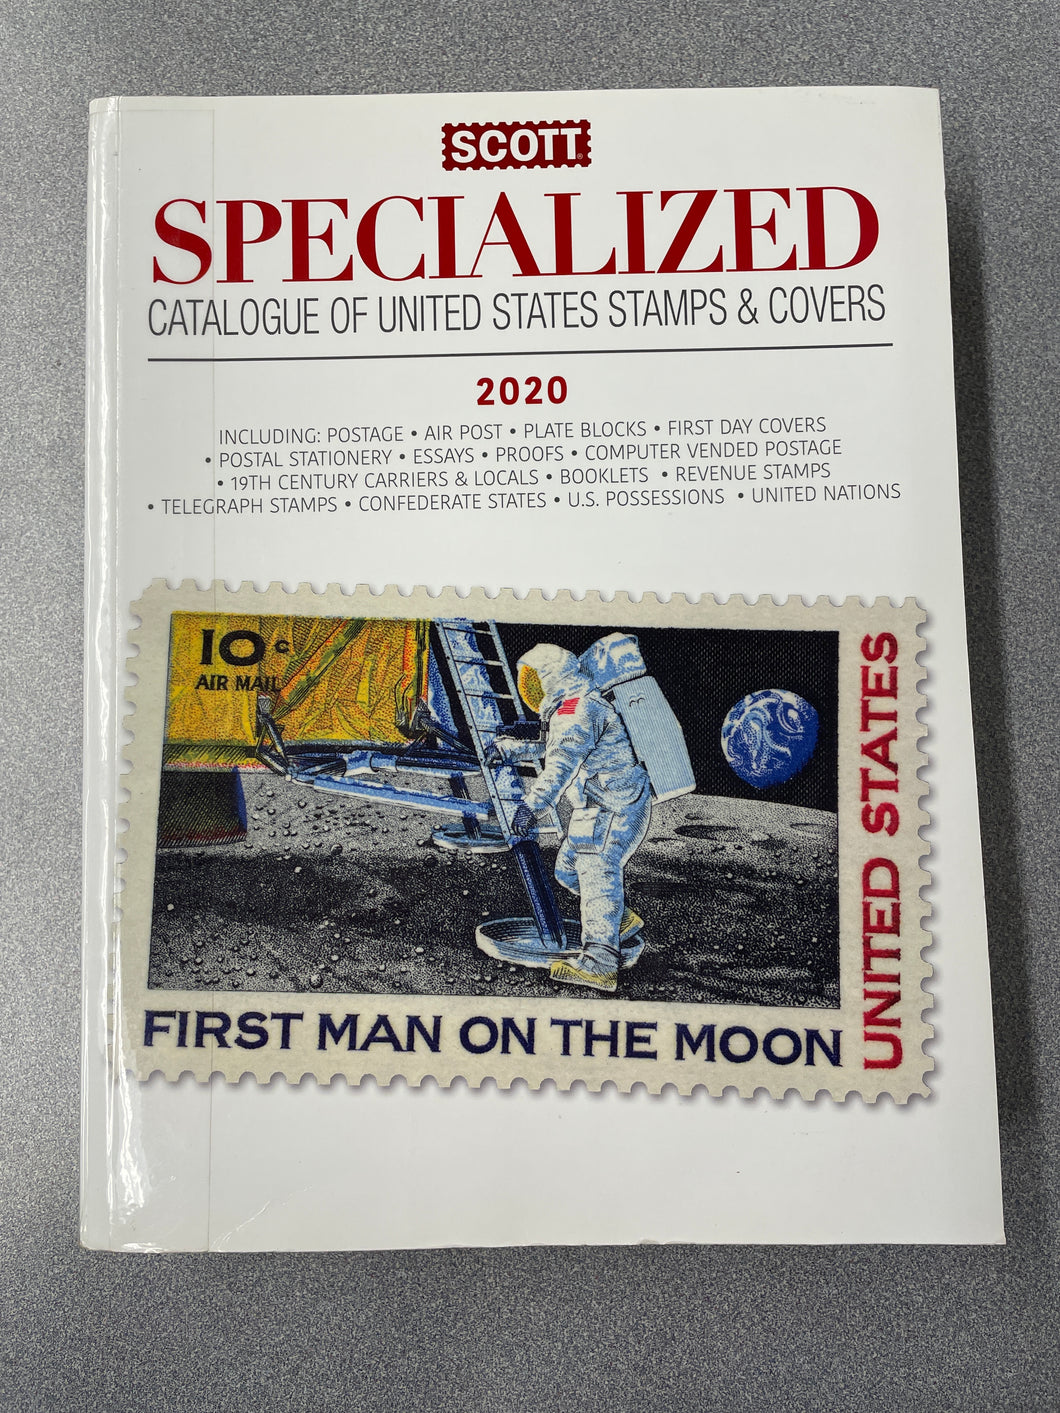 CG  Scott Specialized Catalogue of United States Stamps & Covers, 2020, Bigalke, Jay, ed. [2019] N 3/24